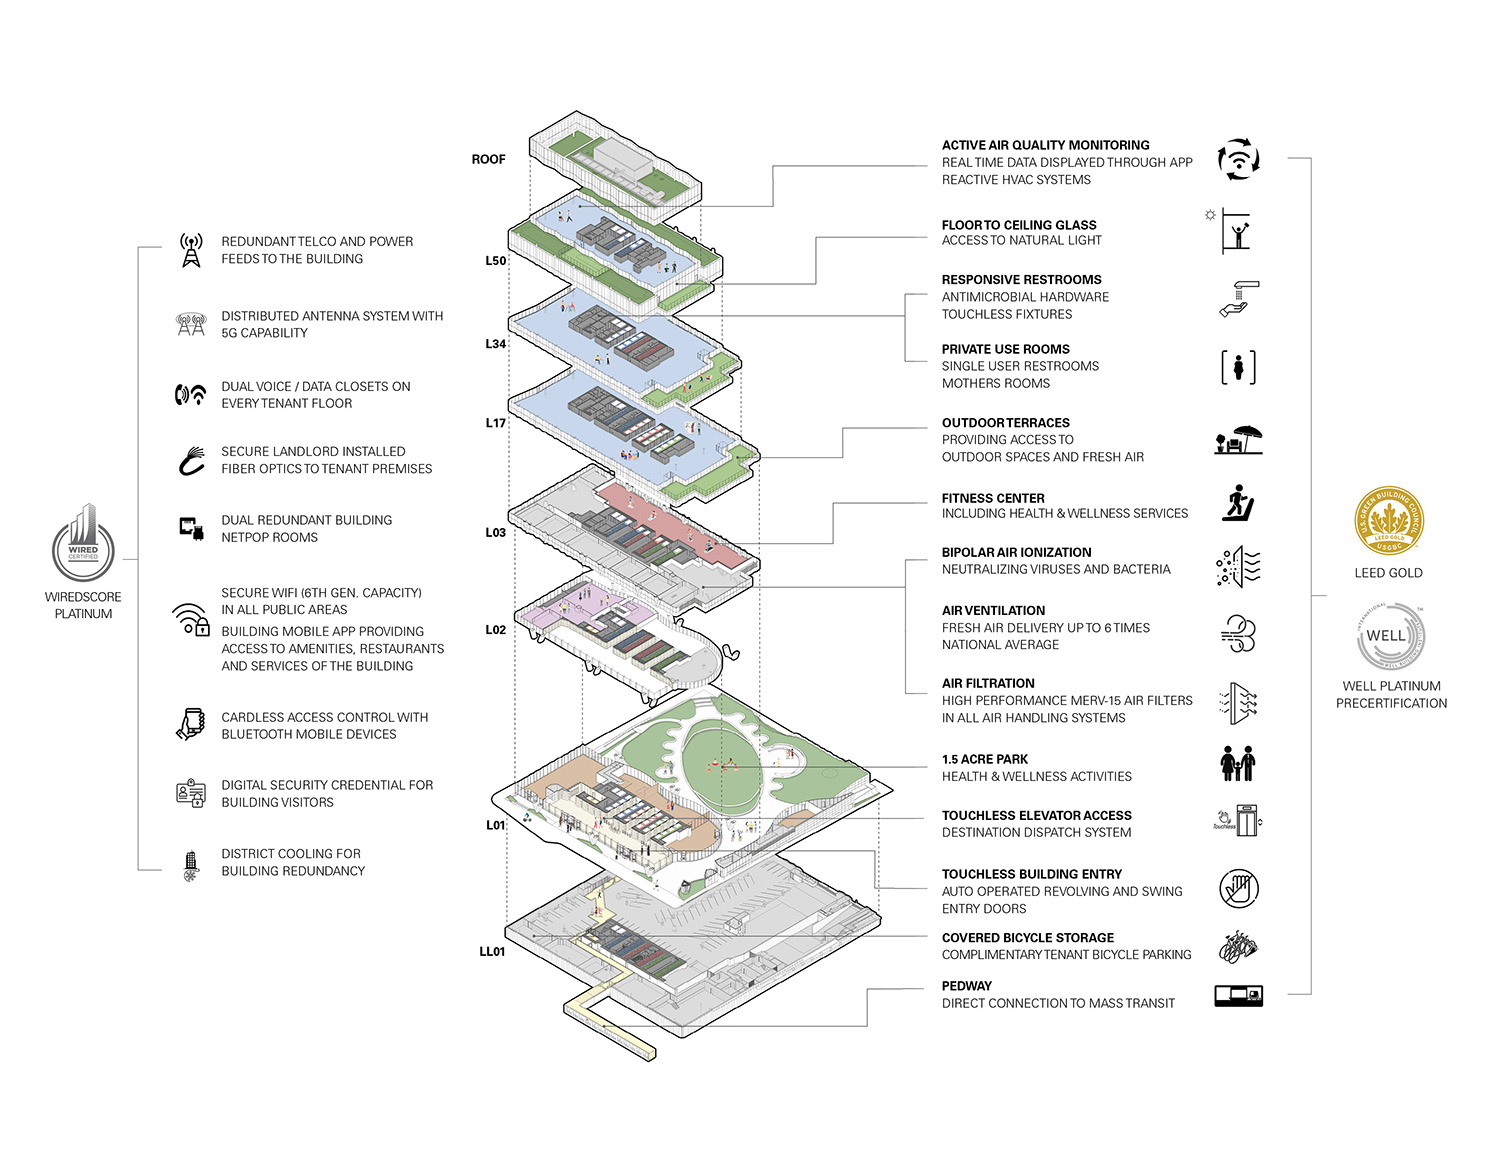 Illustration of the project's technology, sustainability, and wellness features. Illustration courtesy Goettsch Partners